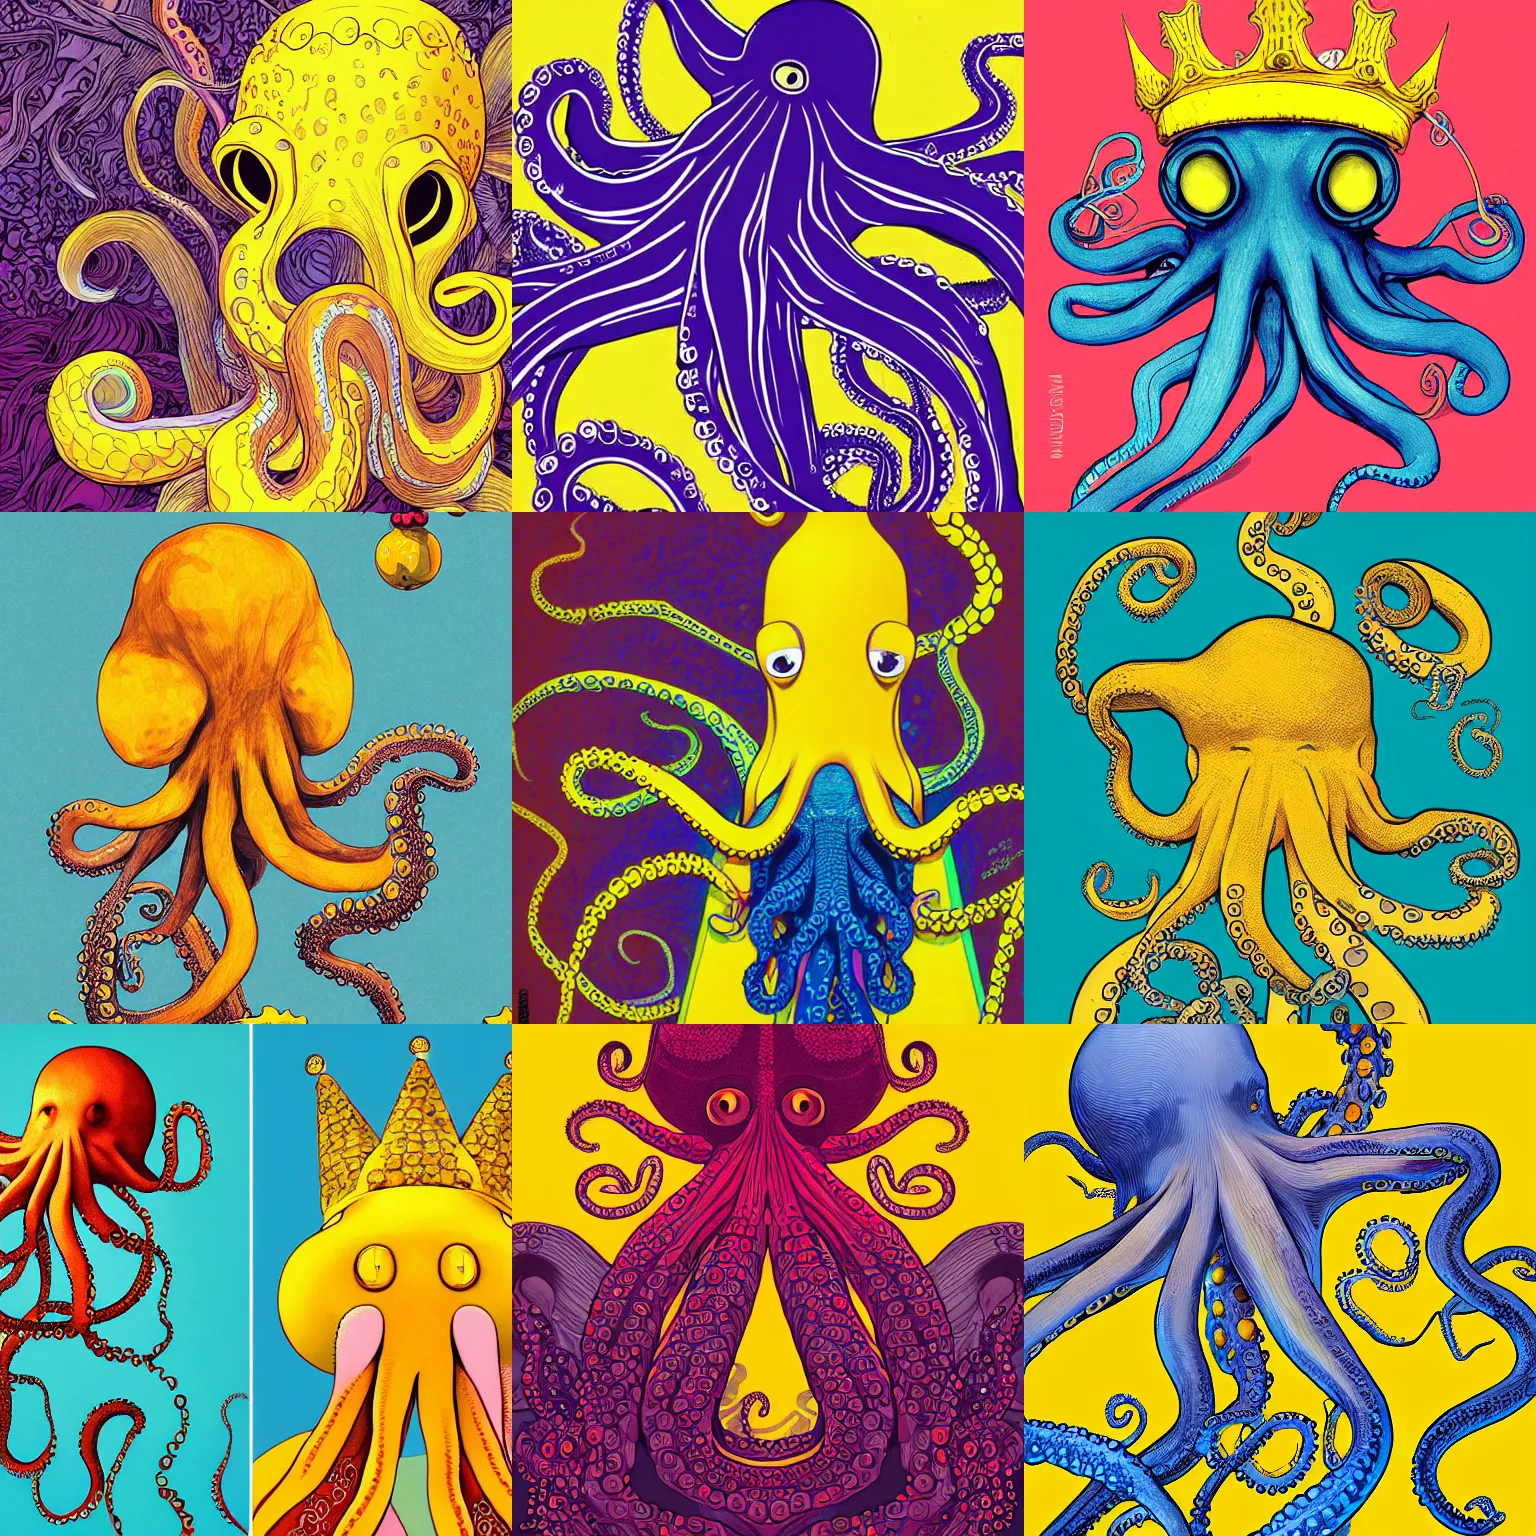 Prompt: portrait of an octopus wearing a yellow crown, fancy, atmospheric, full or color, illustration by James Jean, illustration by Ilya Kuvshinov, illustration by Loish Van Baarle